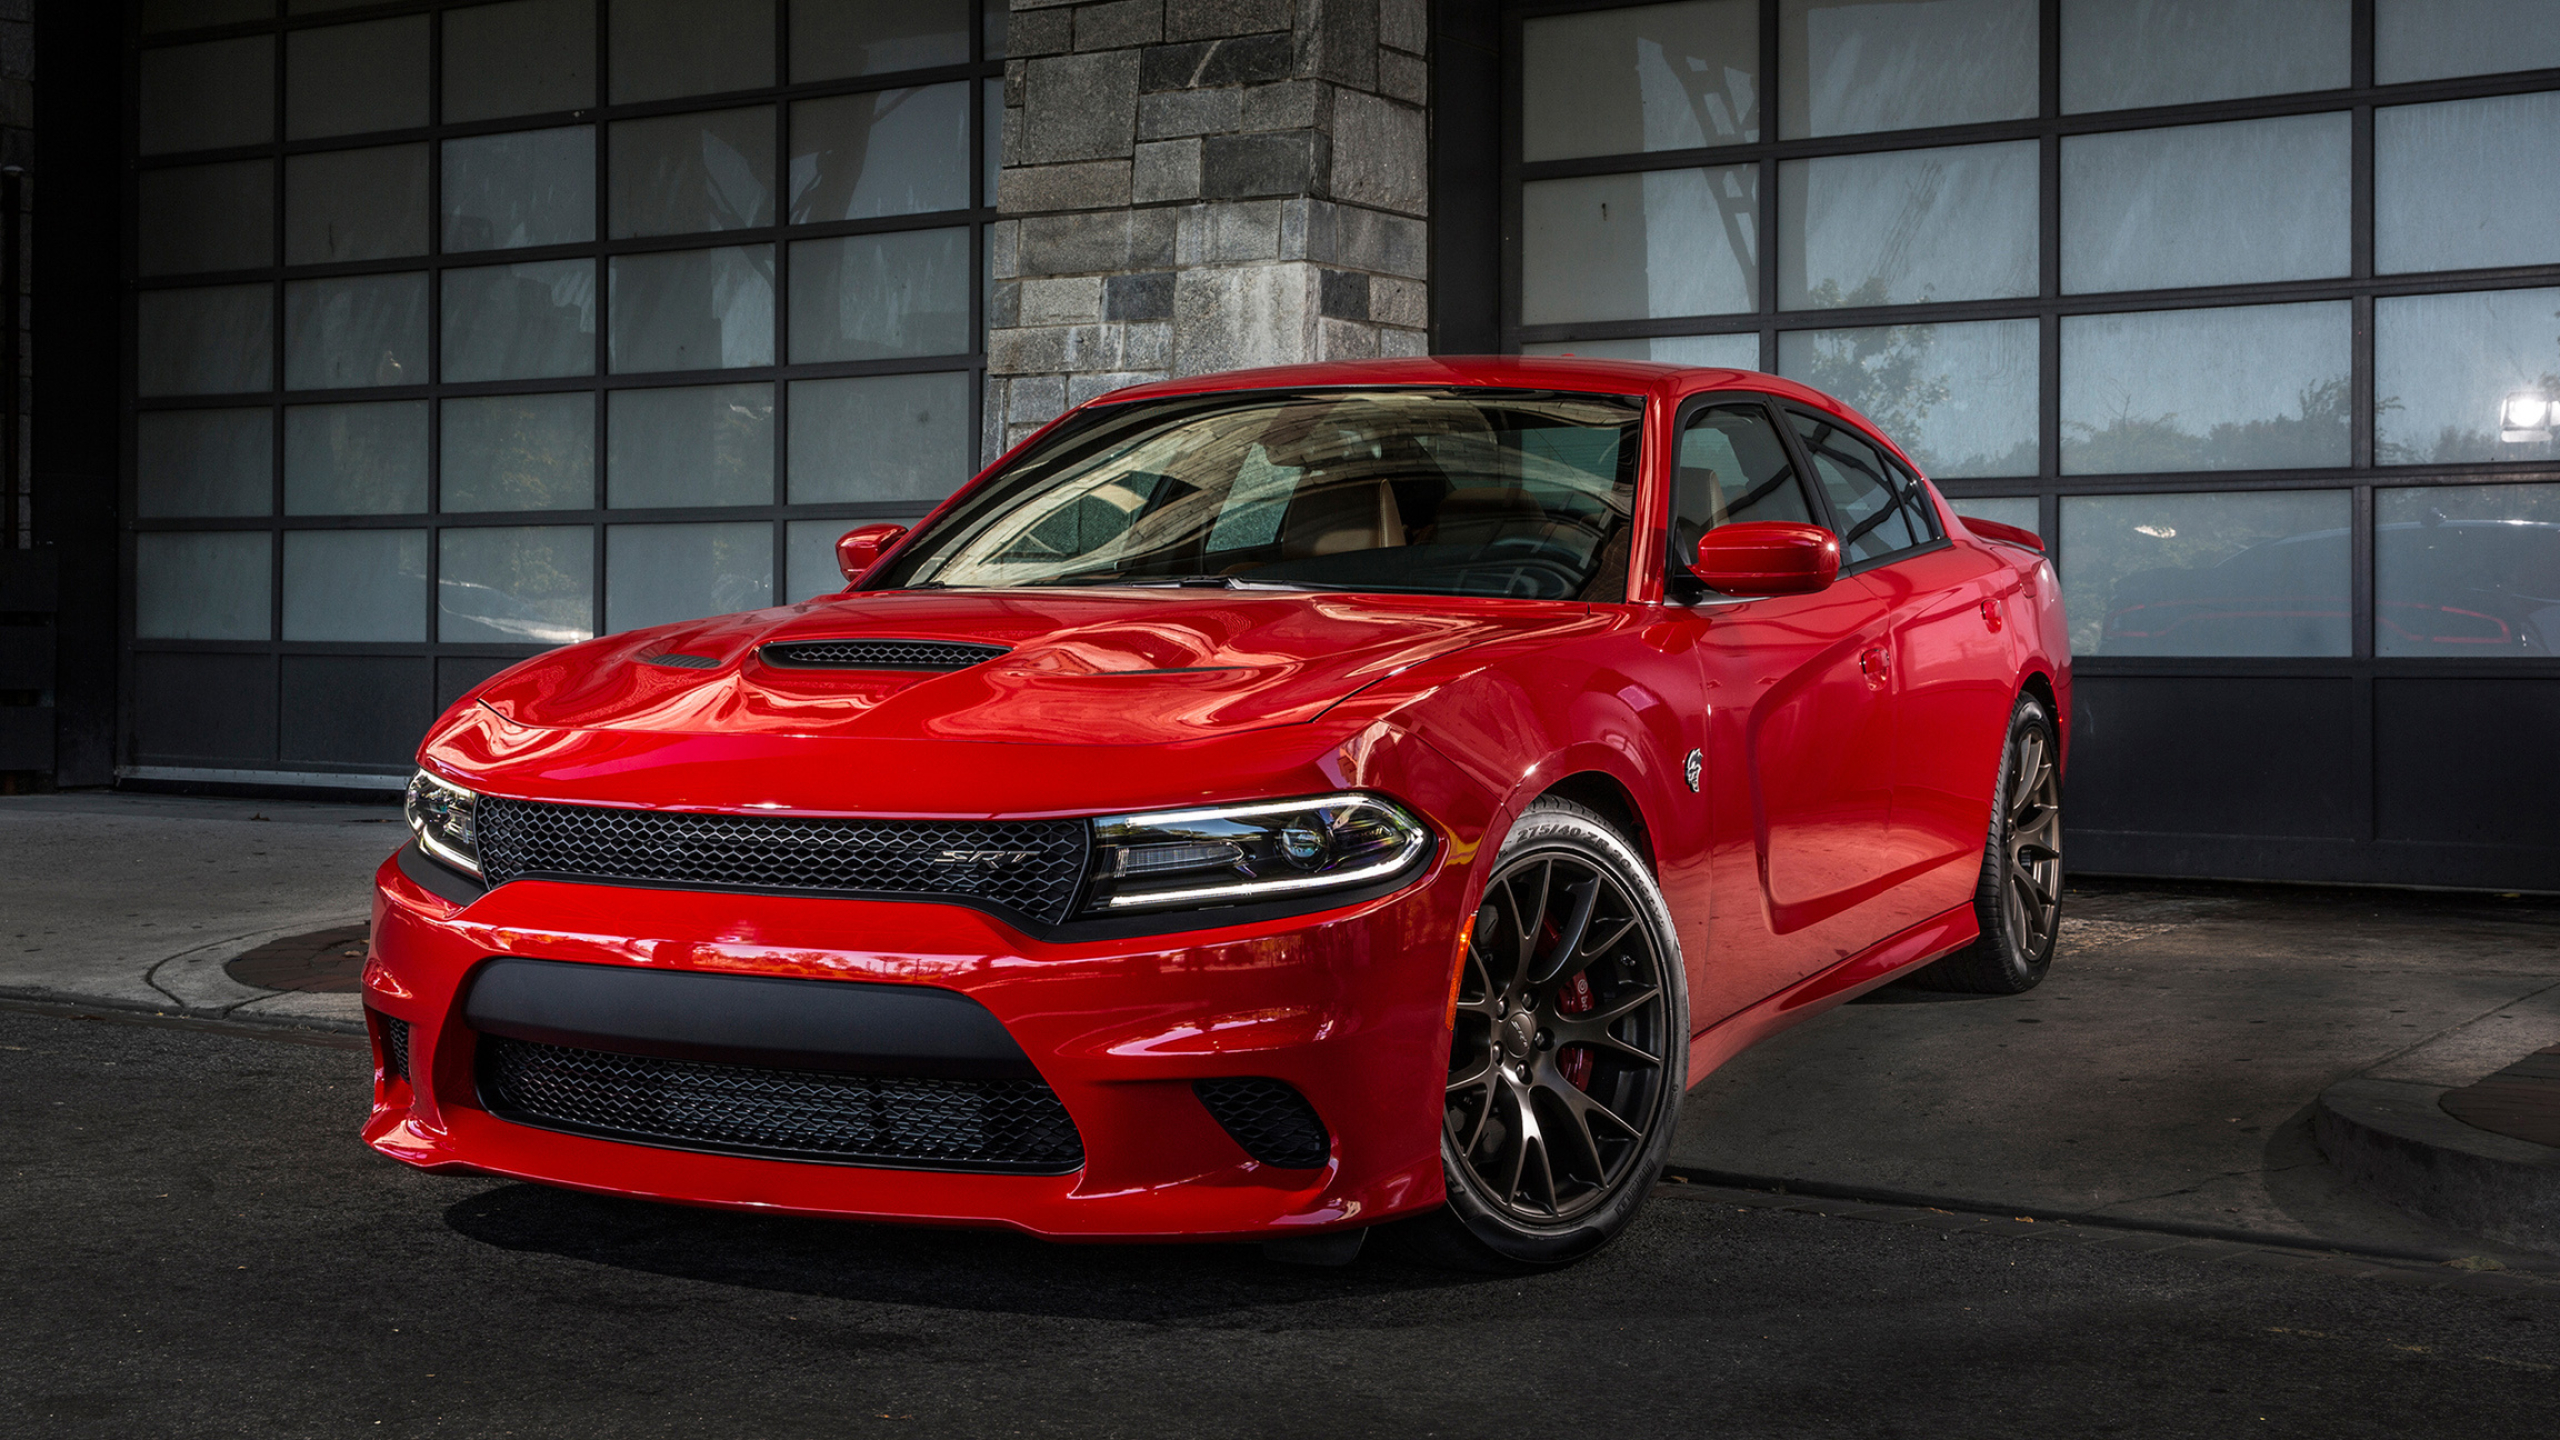 Dodge Charger, Red color, Stunning wallpaper, Powerful car, 2560x1440 HD Desktop